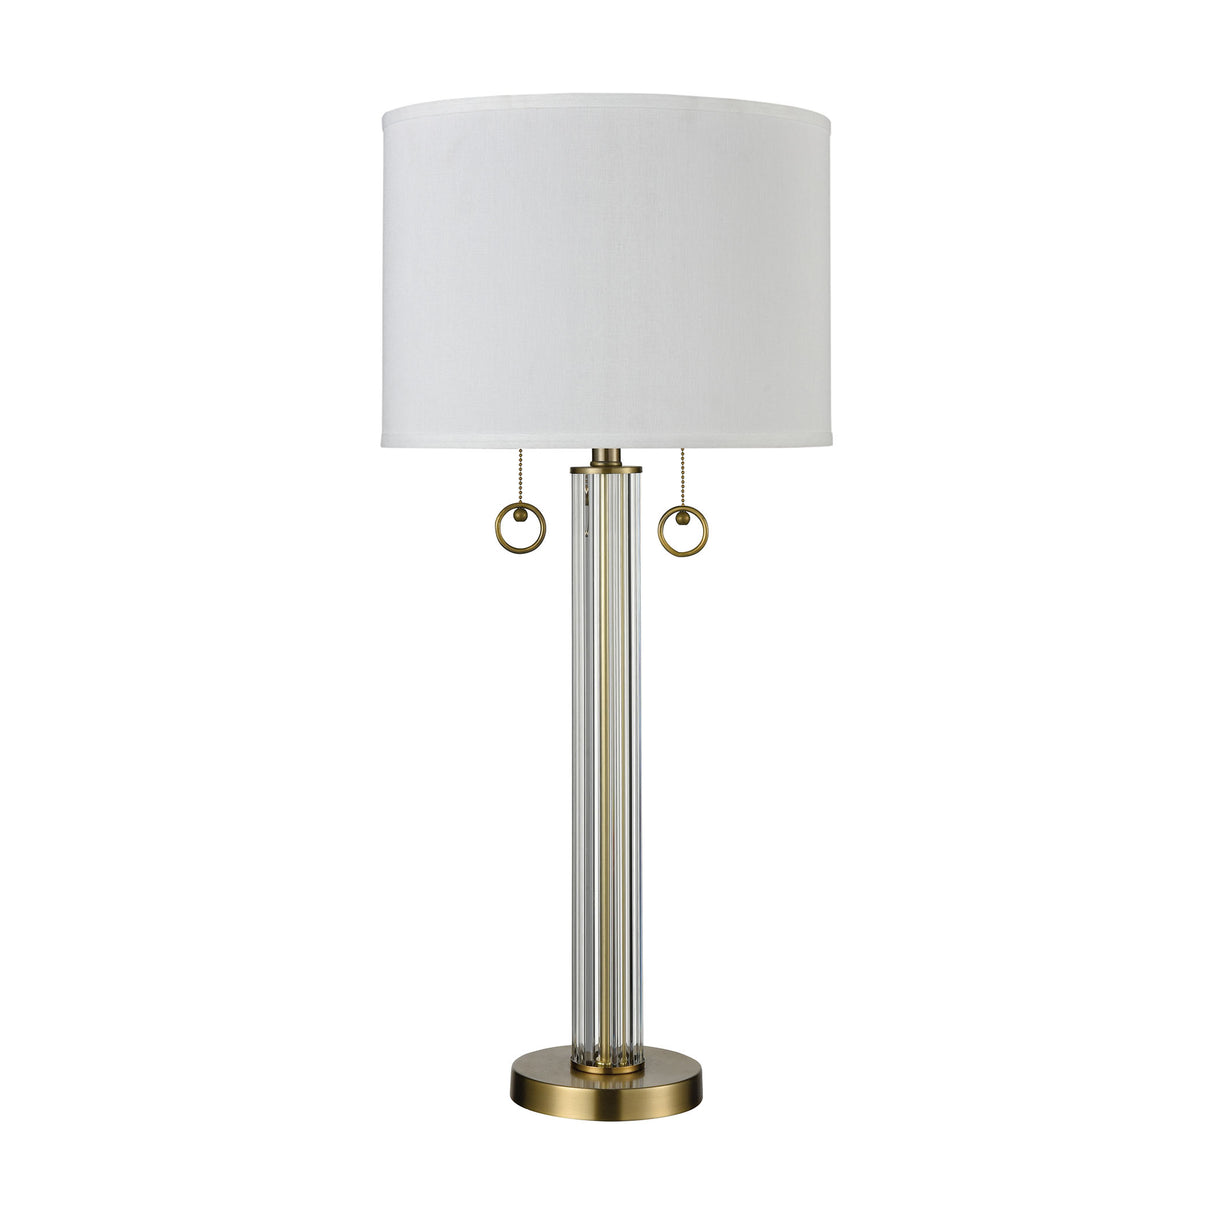 Elk 77143 Cannery Row 34'' High 2-Light Table Lamp - Antique Brass